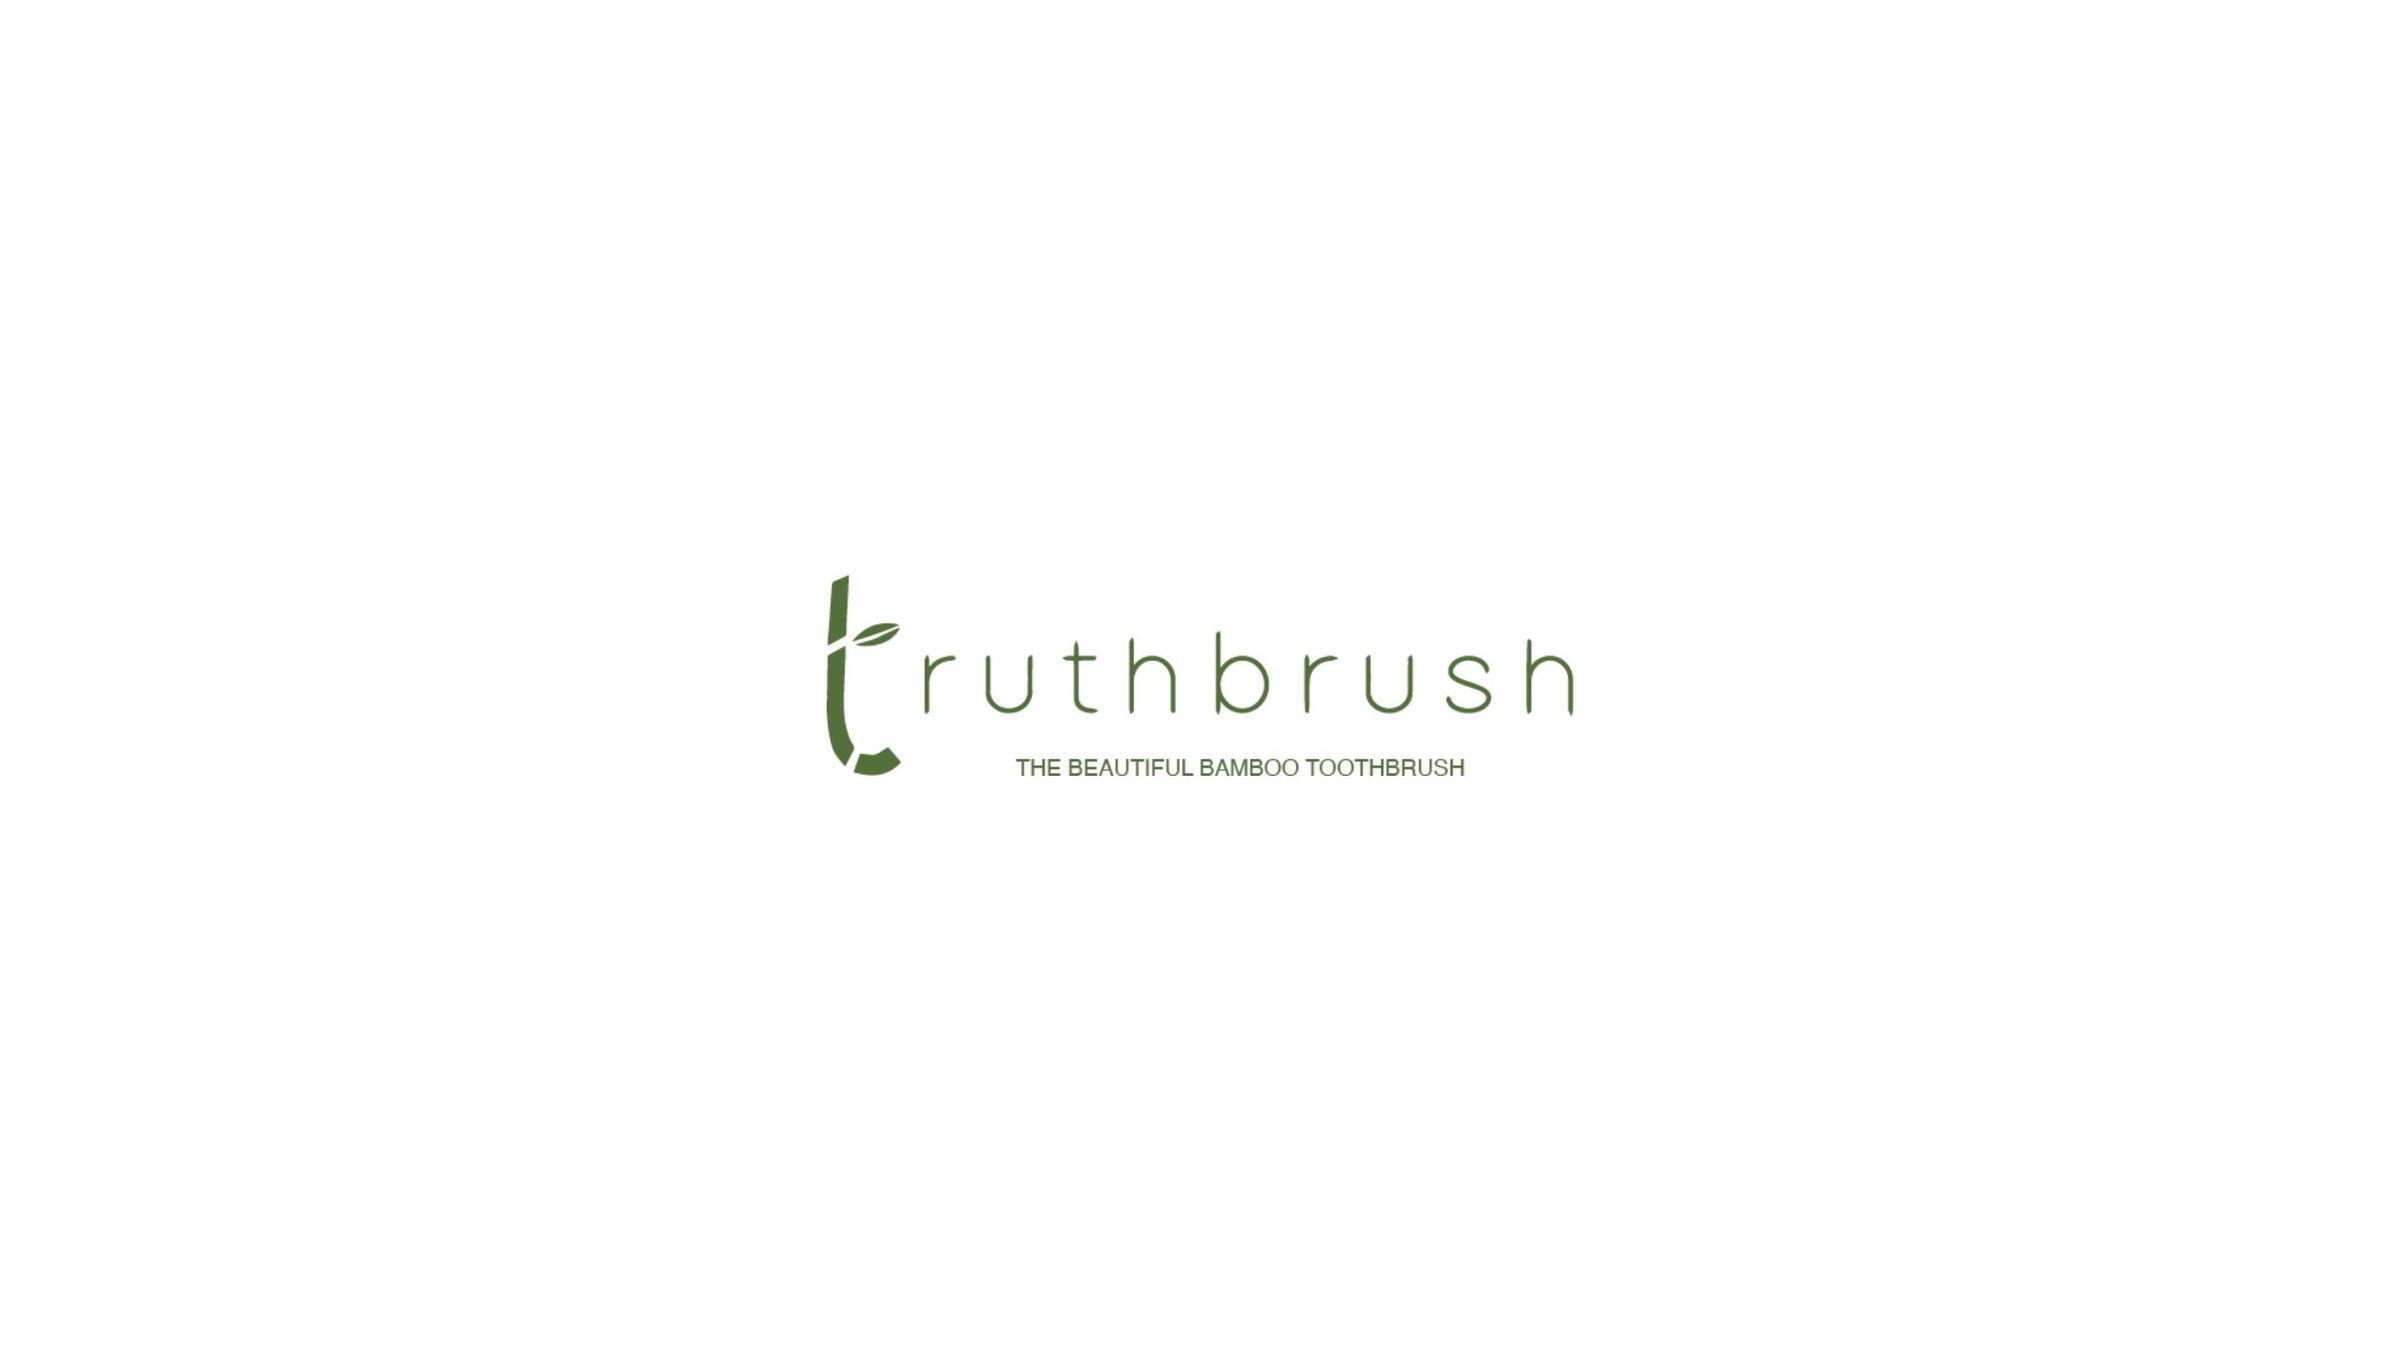 truthbrush logo. The T look like a bamboo stick and the rest of the lettering is in a dark green fine modern font